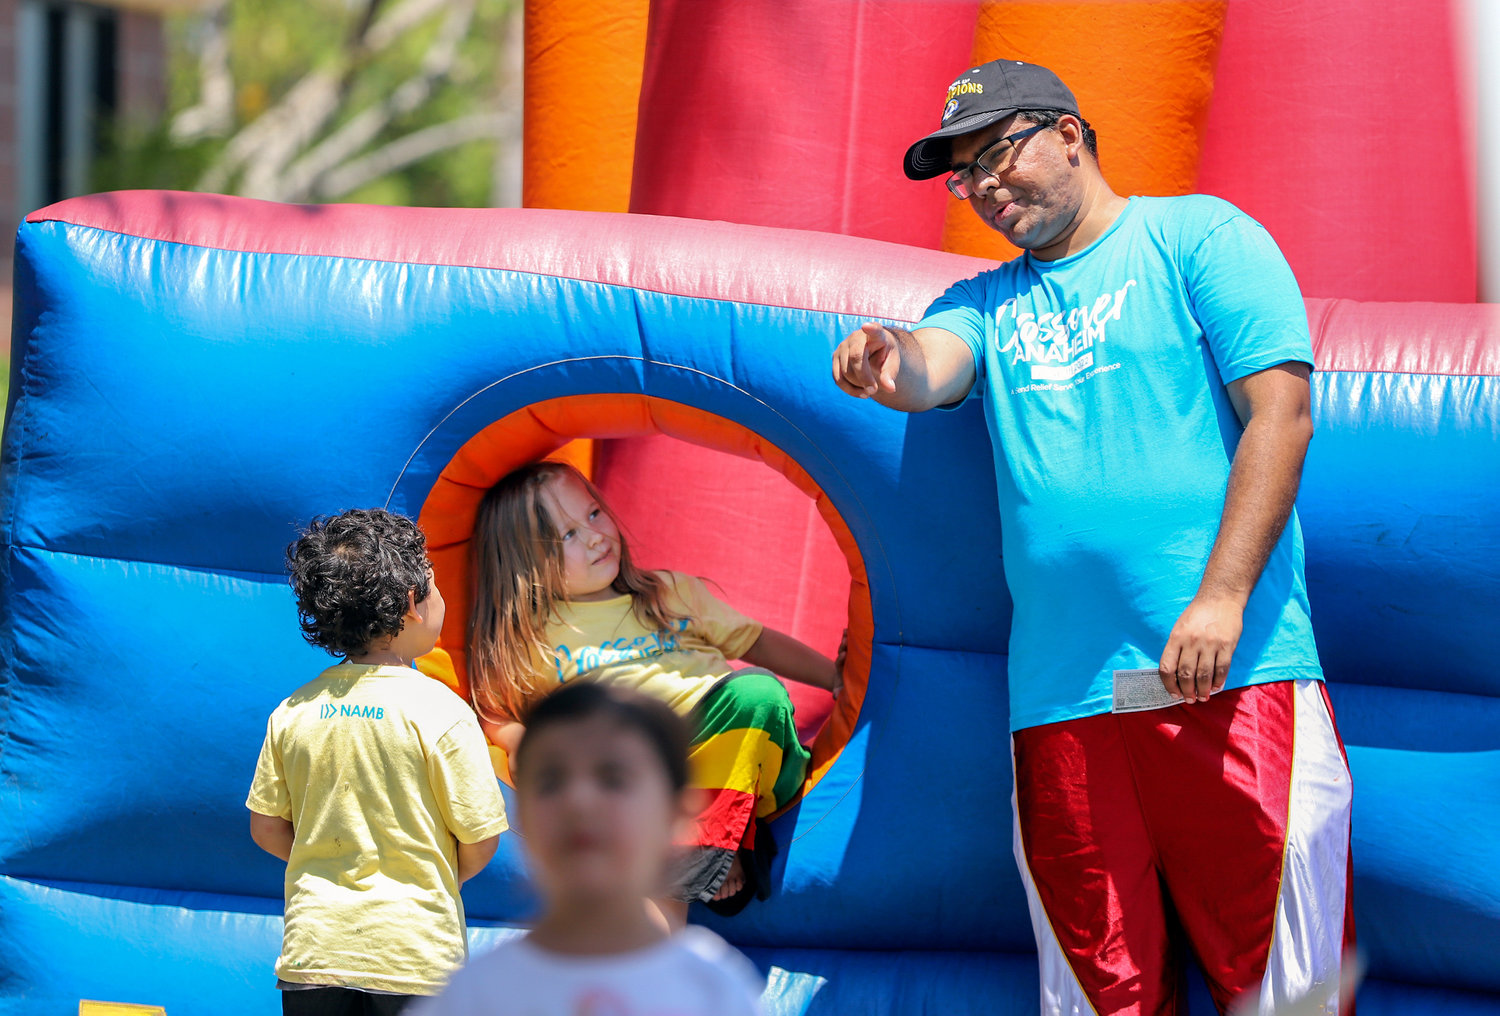 Prashant Joseph, a member of First Southern Baptist Church of Anaheim, Calif., assists kids on a bounce house at a block party at Friends Baptist Church in Yorba Linda, Calif., June 11, 2022. The evangelistic event, part of Crossover Anaheim, included free food, a fitness boot camp, prizes and games. (NAMB/Sonya Singh)